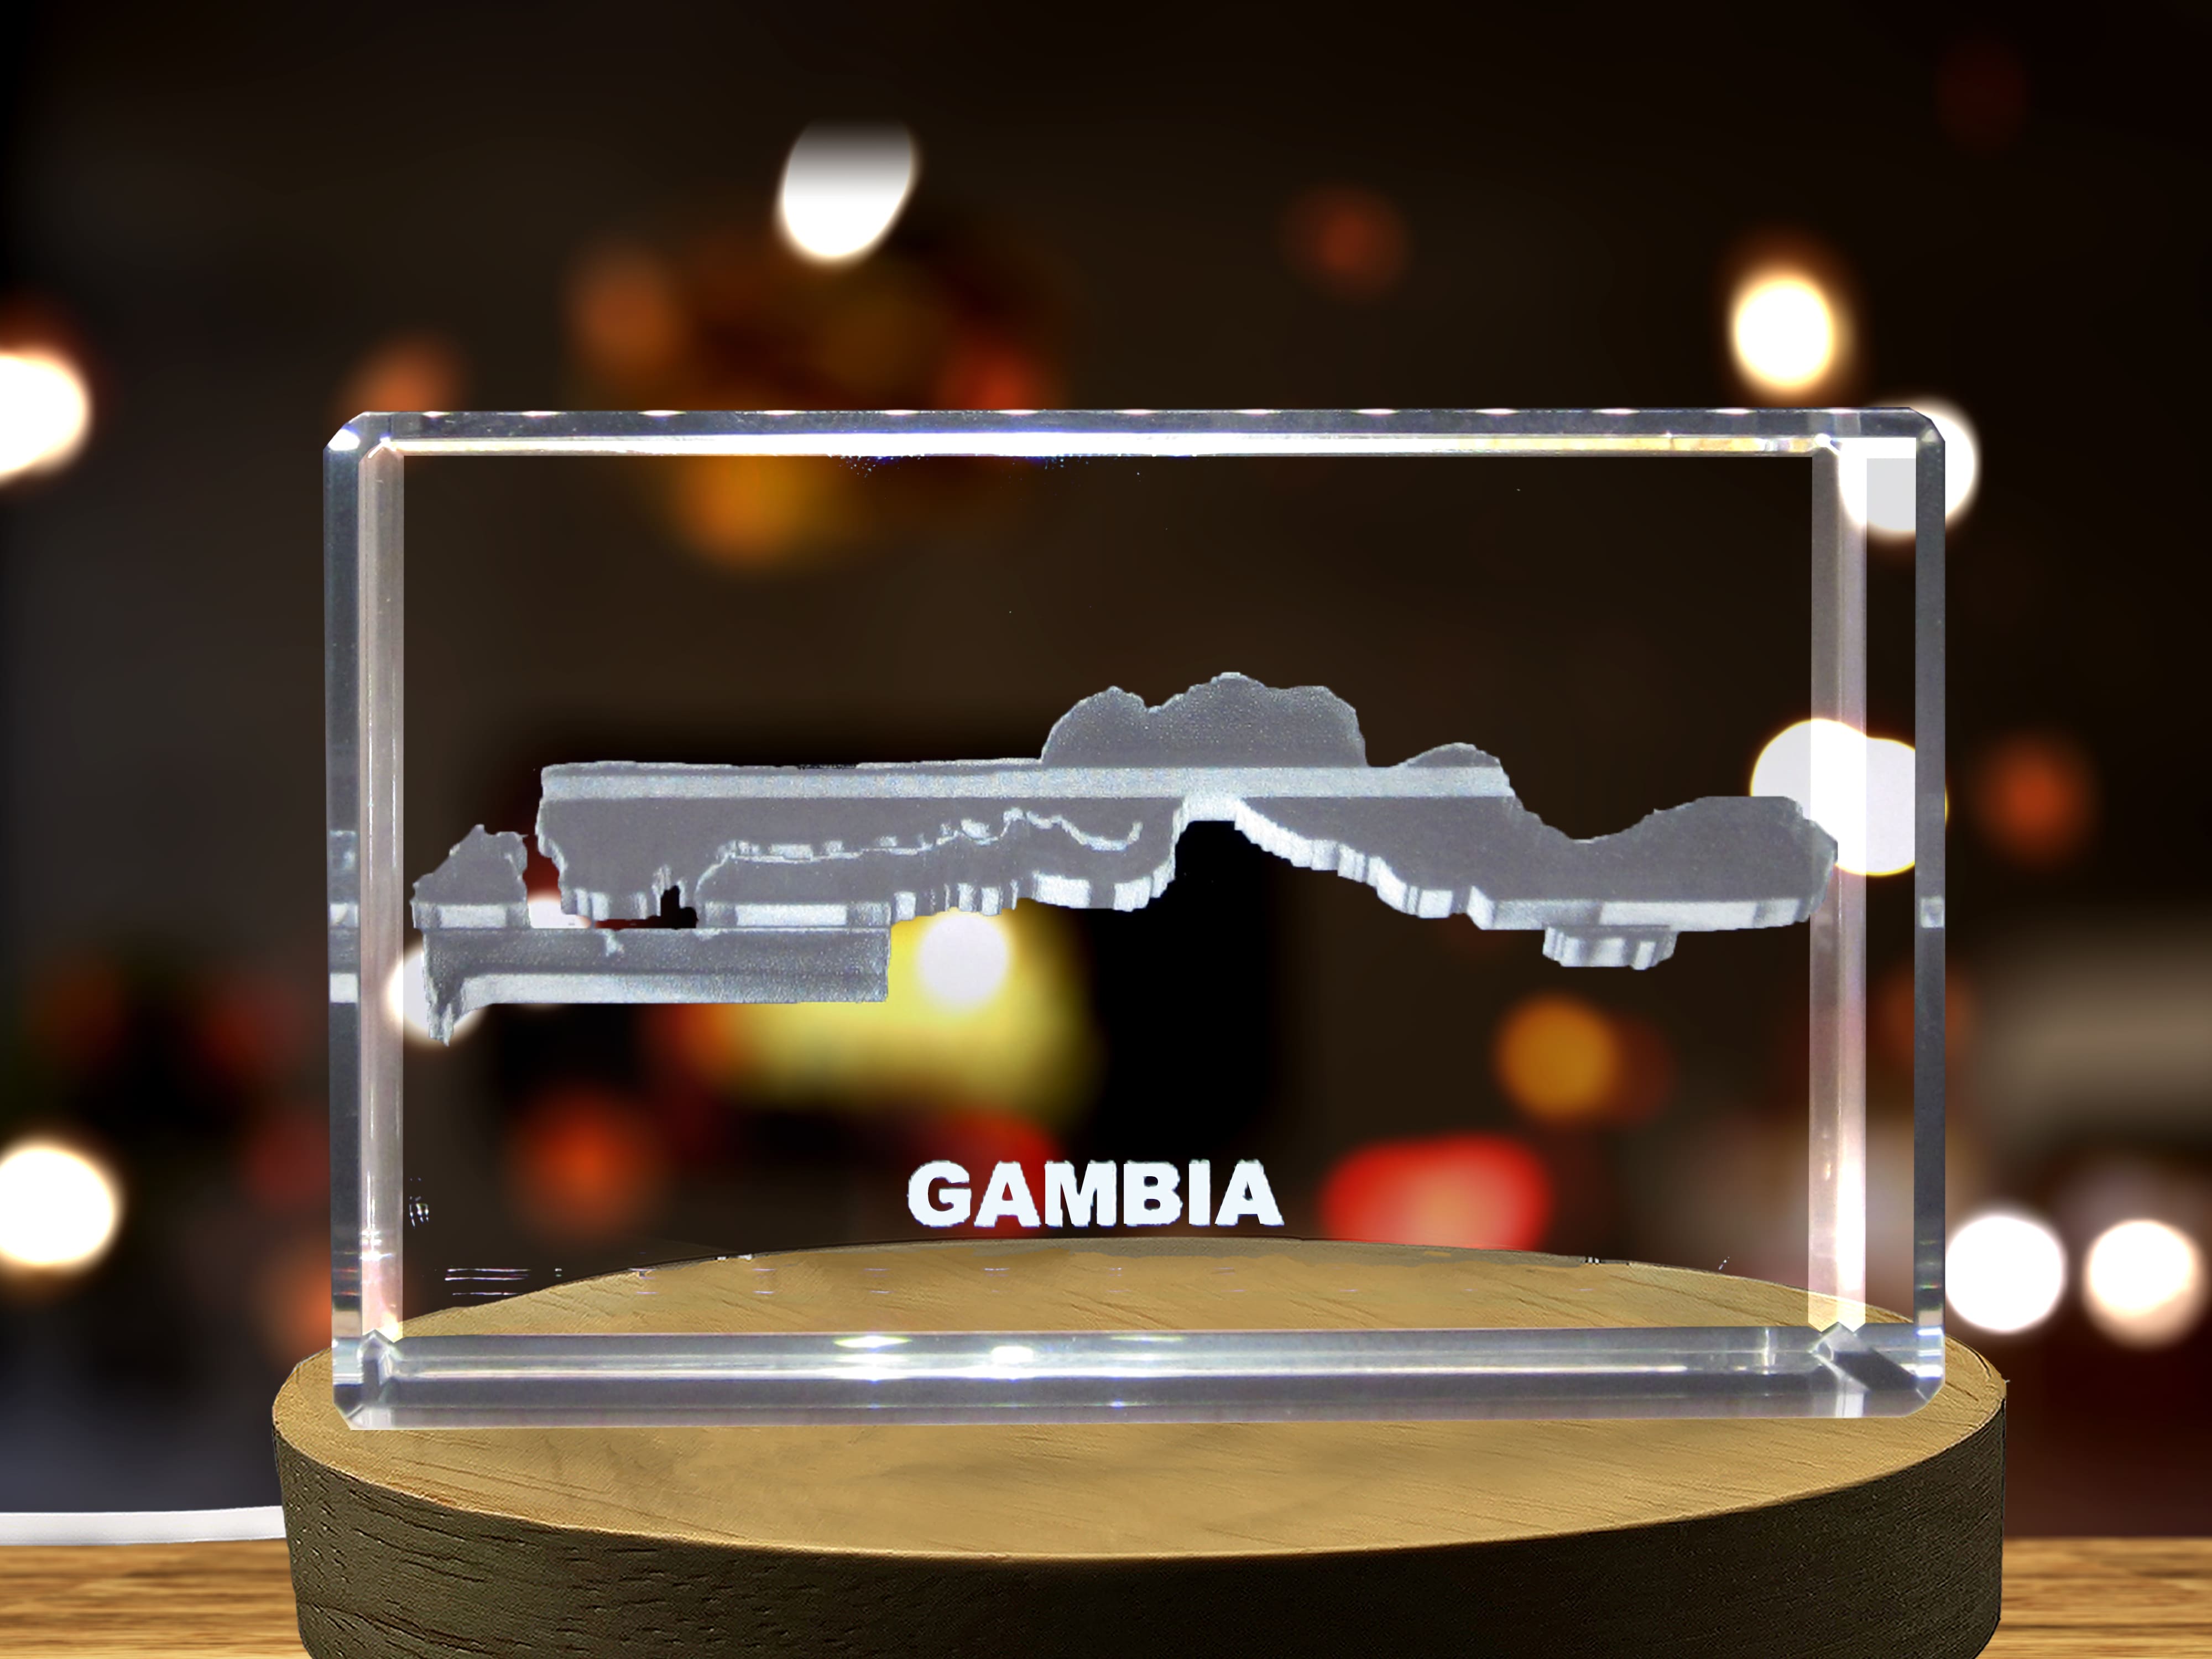 Gambia 3D Engraved Crystal 3D Engraved Crystal Keepsake/Gift/Decor/Collectible/Souvenir A&B Crystal Collection